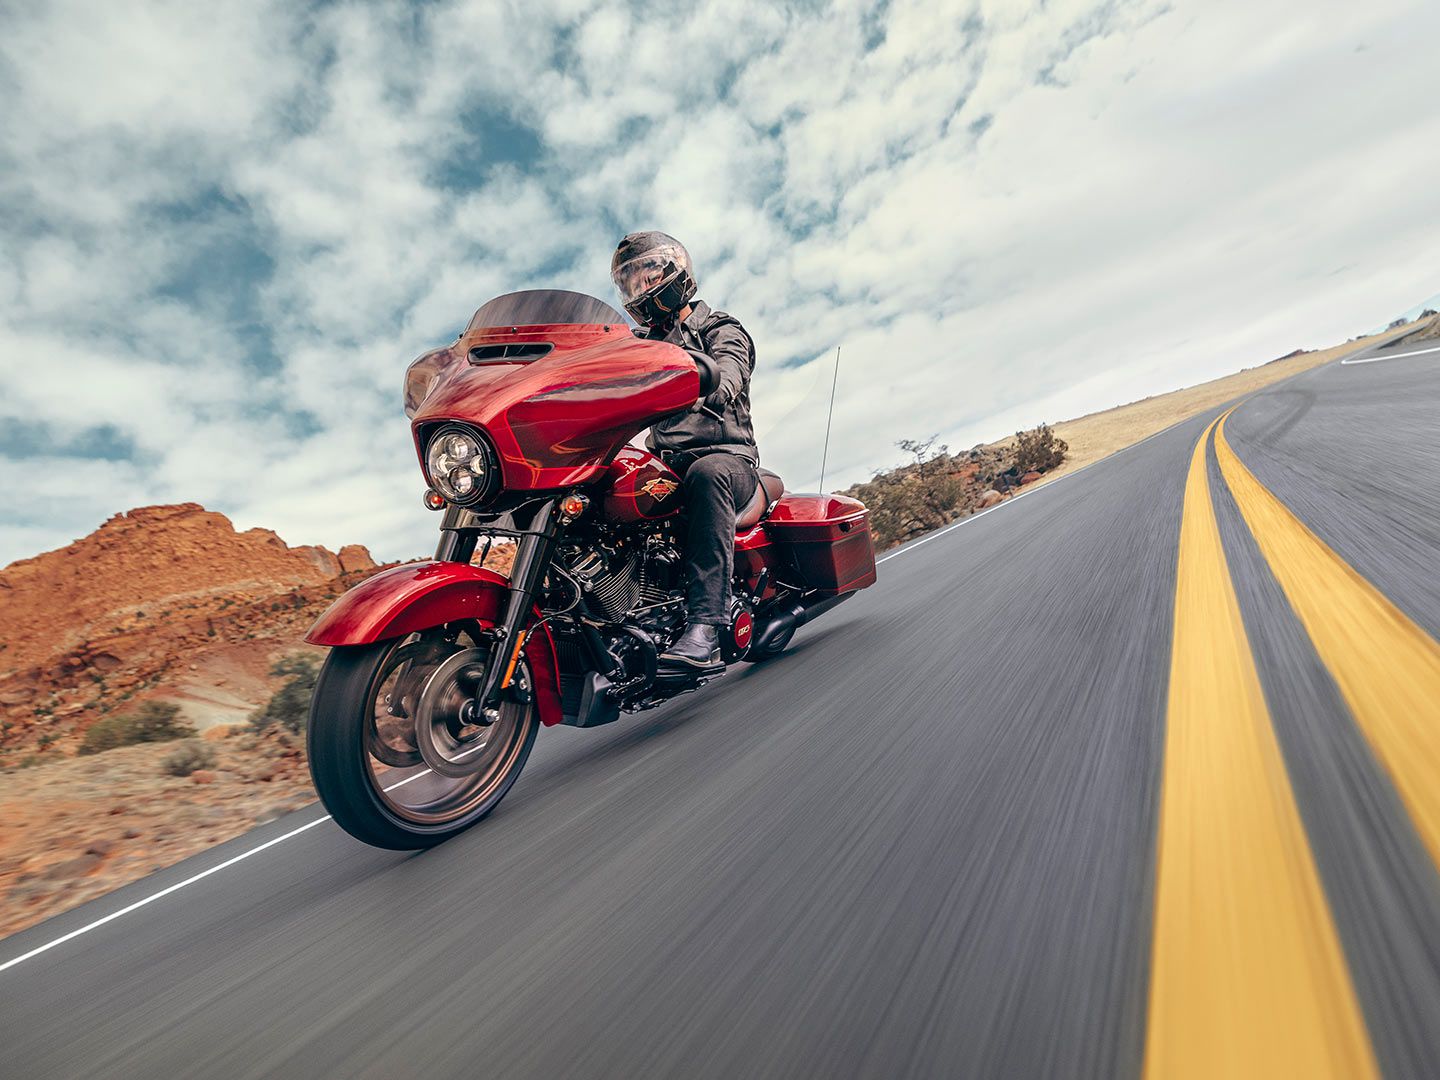 The Street Glide Special Anniversary’s maximum lean angles of 32 degrees right and 31 degrees left are modest, but sufficient for most roads traveled by big baggers like the Street Glide Special.